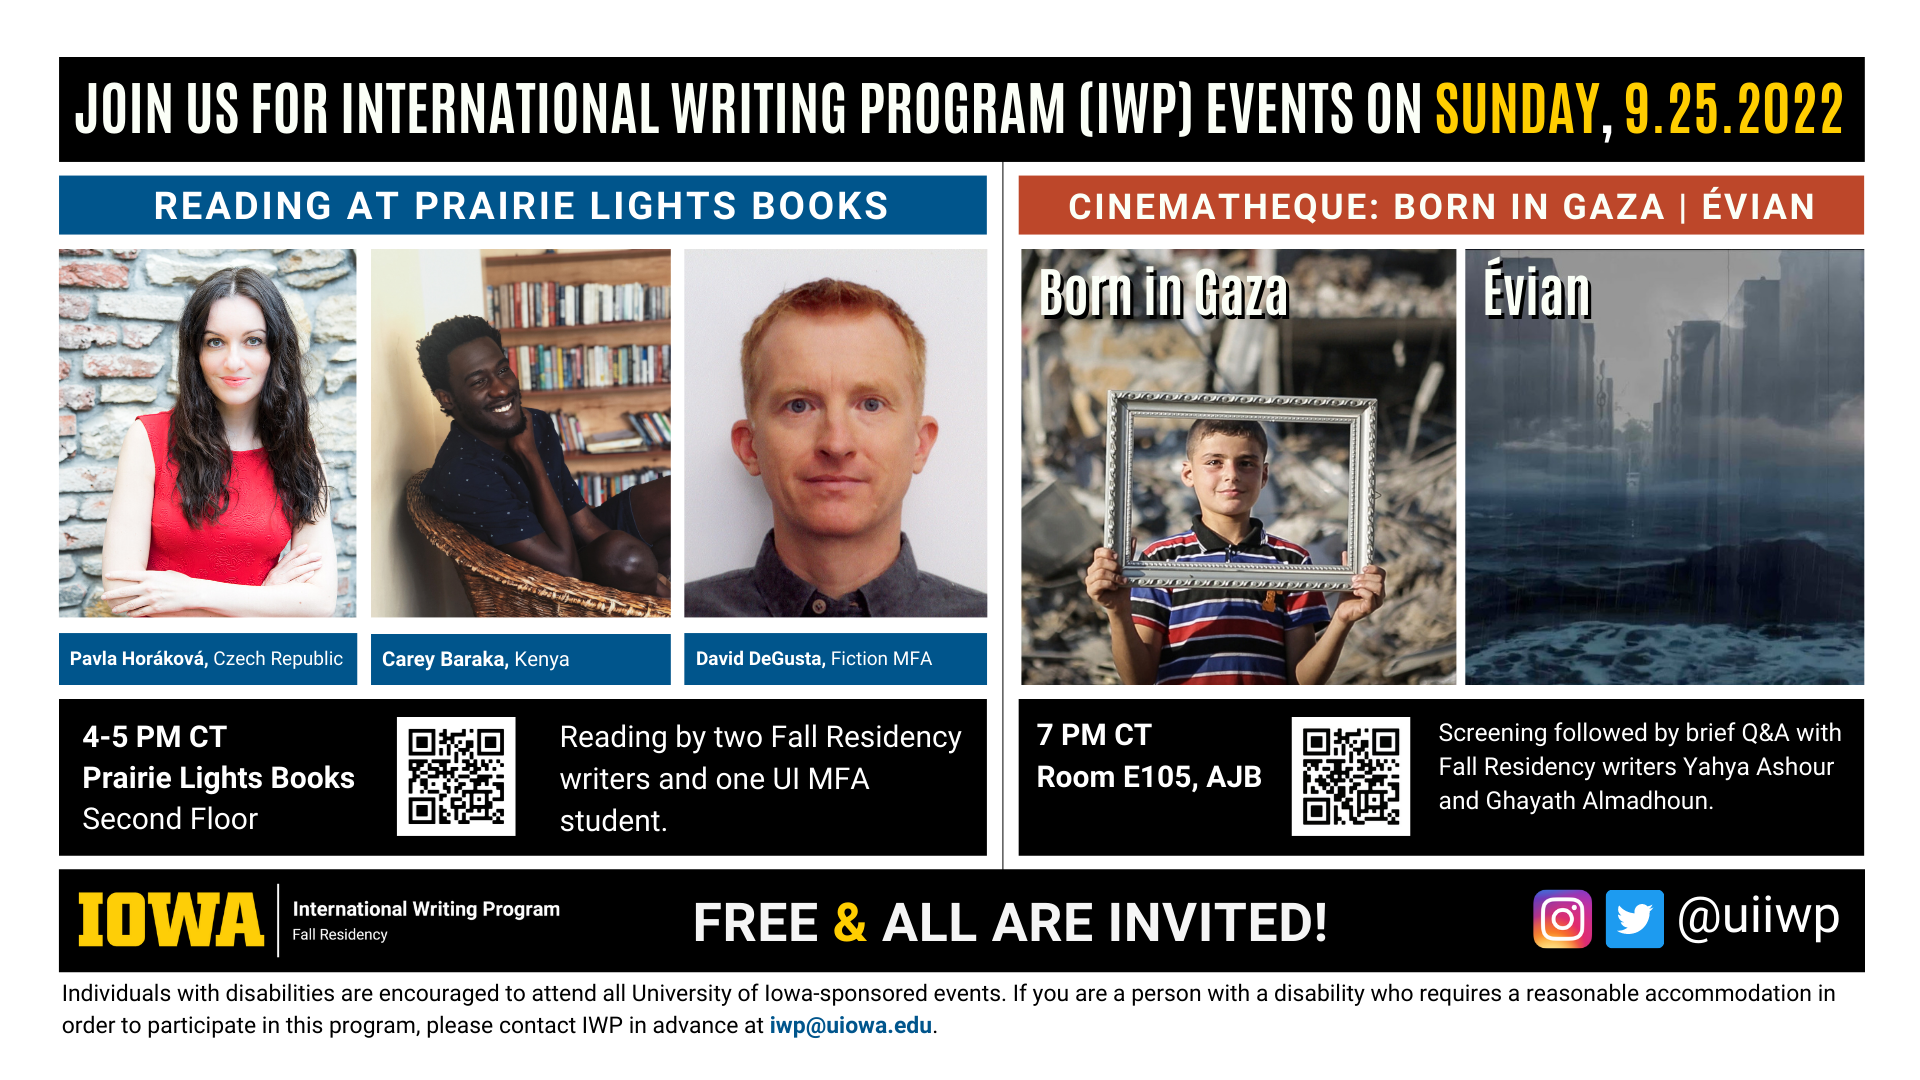 An image with two halves, each advertising one event. The image as a whole is labeled "Join us for International Writing Program (IWP) Events on Sunday, 9.25.2022. The left half left of the image is labeled "Reading at Prairie Lights Books." There are portraits of three writers (named below) and the following text: " Pavla Horáková, Czech Republic. Carey Baraka, Kenya. David DeGusta, Fiction MFA. 4-5 PM CT Prairie Lights Books, Second Floor. Reading by two Fall Residency writers and one UI MFA student." The right half of the image is labeled "Born in Gaza" and “Évian.” Below that heading there are a screenshots from the films of those names; on the left, a young boy in front of a pile of rubble holding a picture frame in front of himself so as to frame a portrait, and on the right, what appears to be a dark city half-submerged in ocean water. The following text appears below: "7 PM CT, Room E105 AJB. Screening followed by brief Q&A with Fall Residency writers Yahya Ashour and Ghayath Almadhoun." Below that text there are the IWP Fall Residency logo, the Instagram and Twitter handle @uiiwp, and a note that the event is “Free & All Are Invited.” The following text is at the bottom of the image: "Individuals with disabilities are encouraged to attend all University of Iowa-sponsored events. If you are a person with a disability who requires a reasonable accommodation in order to participate in this program, please contact IWP in advance at iwp@uiowa.edu."